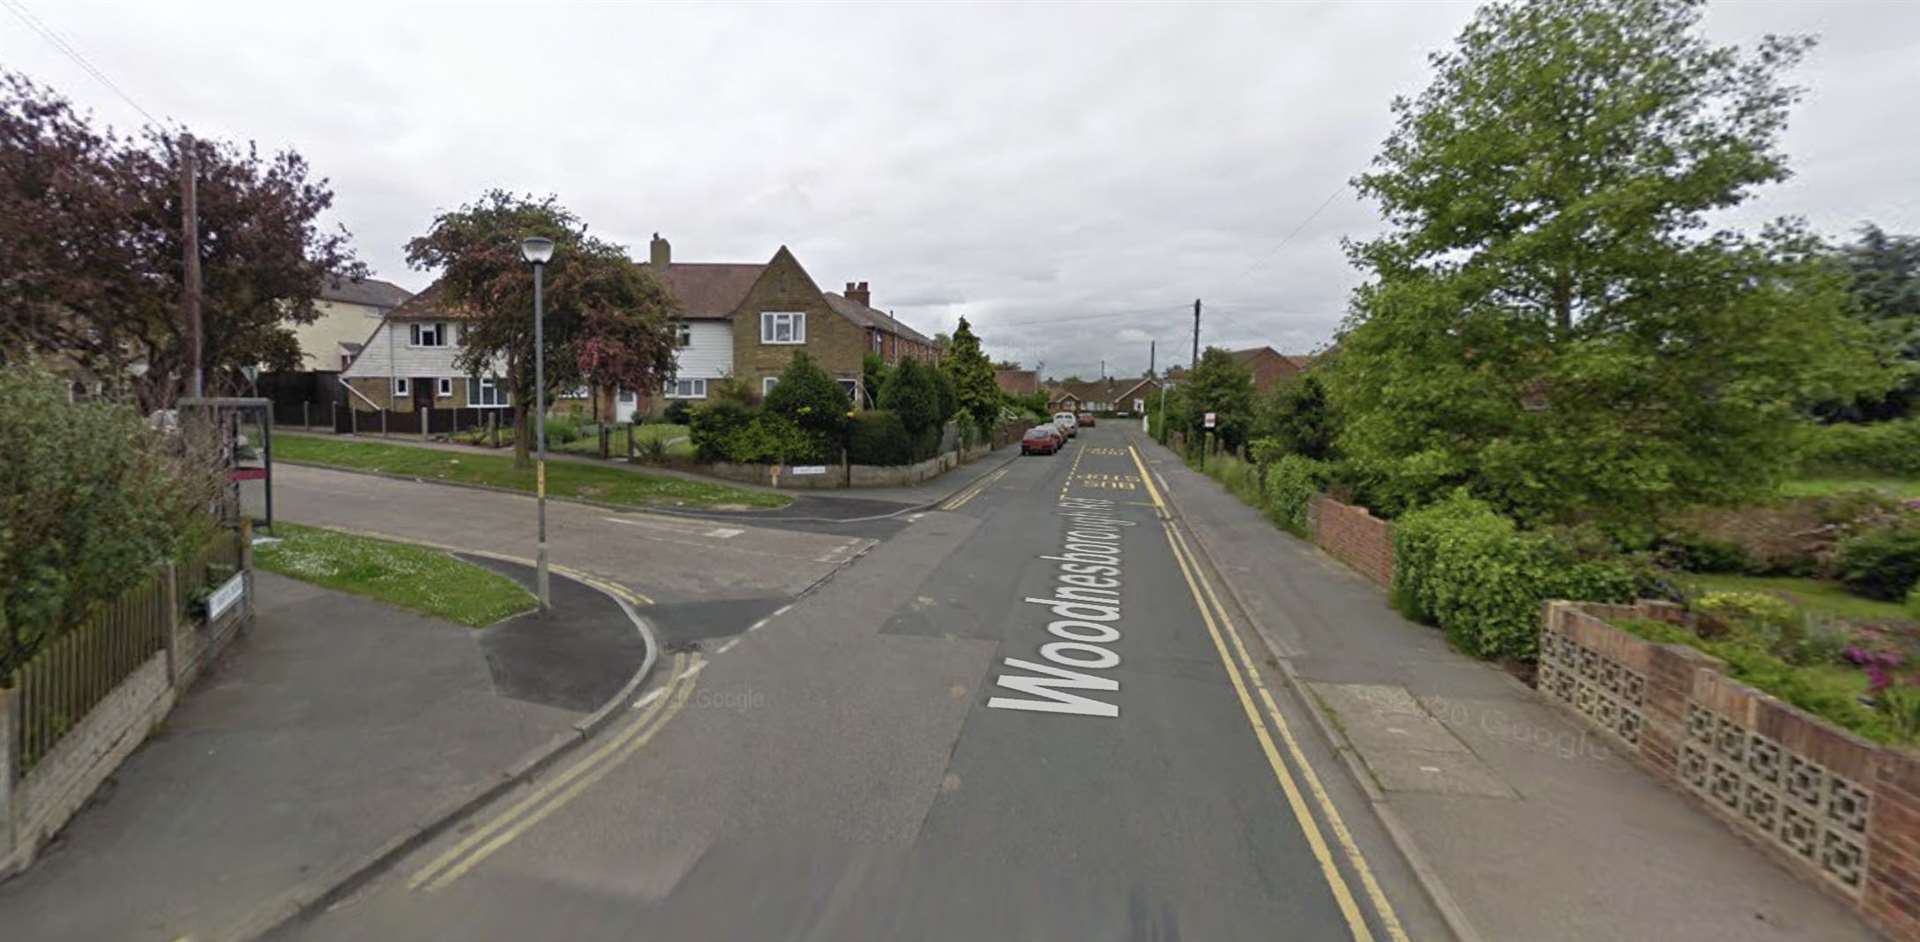 The attack happened at the junction between Woodnesborough Road and St Barts Road in Sandwich. Picture: Google Street View